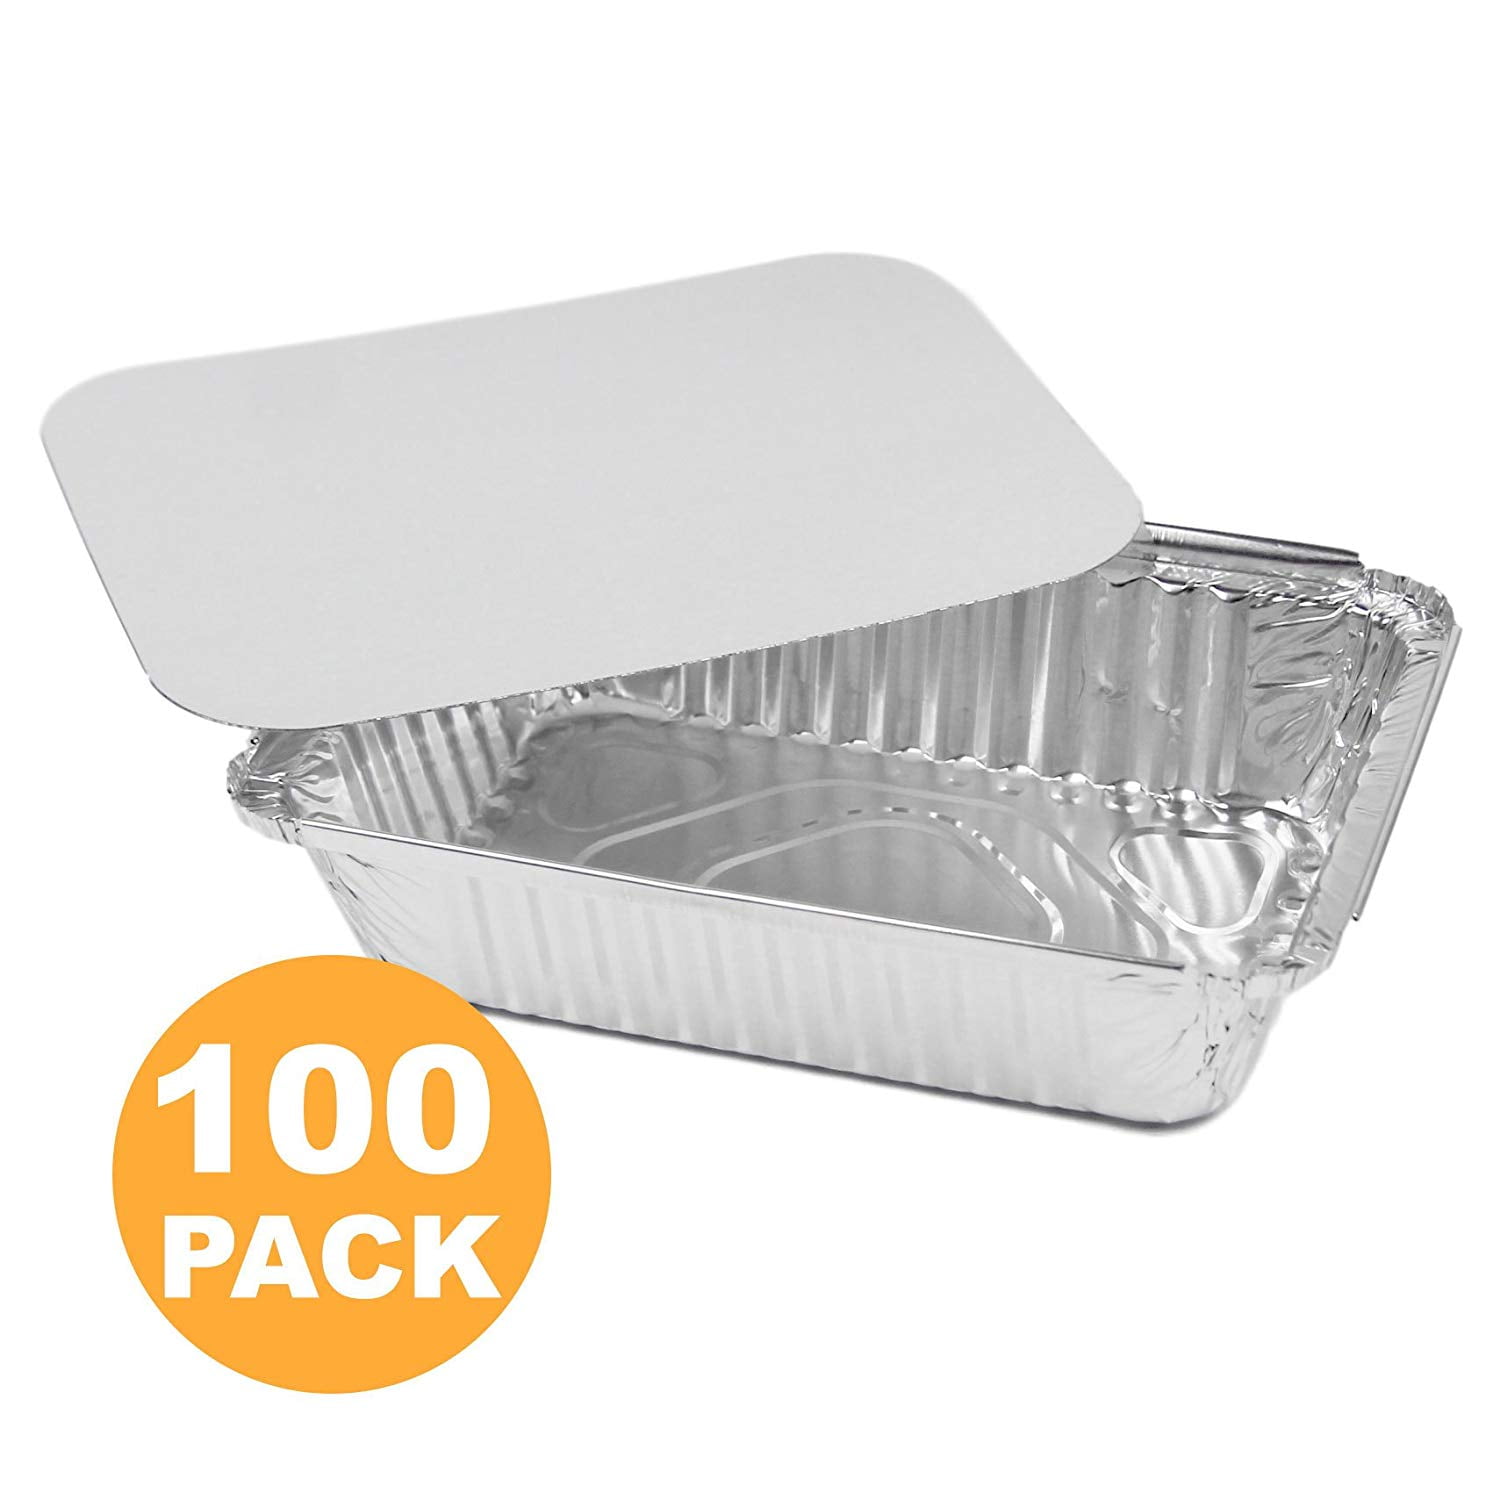 Size No9 Aluminium foil Food Container & Lids Oven Baking Takeaway Home Storage 